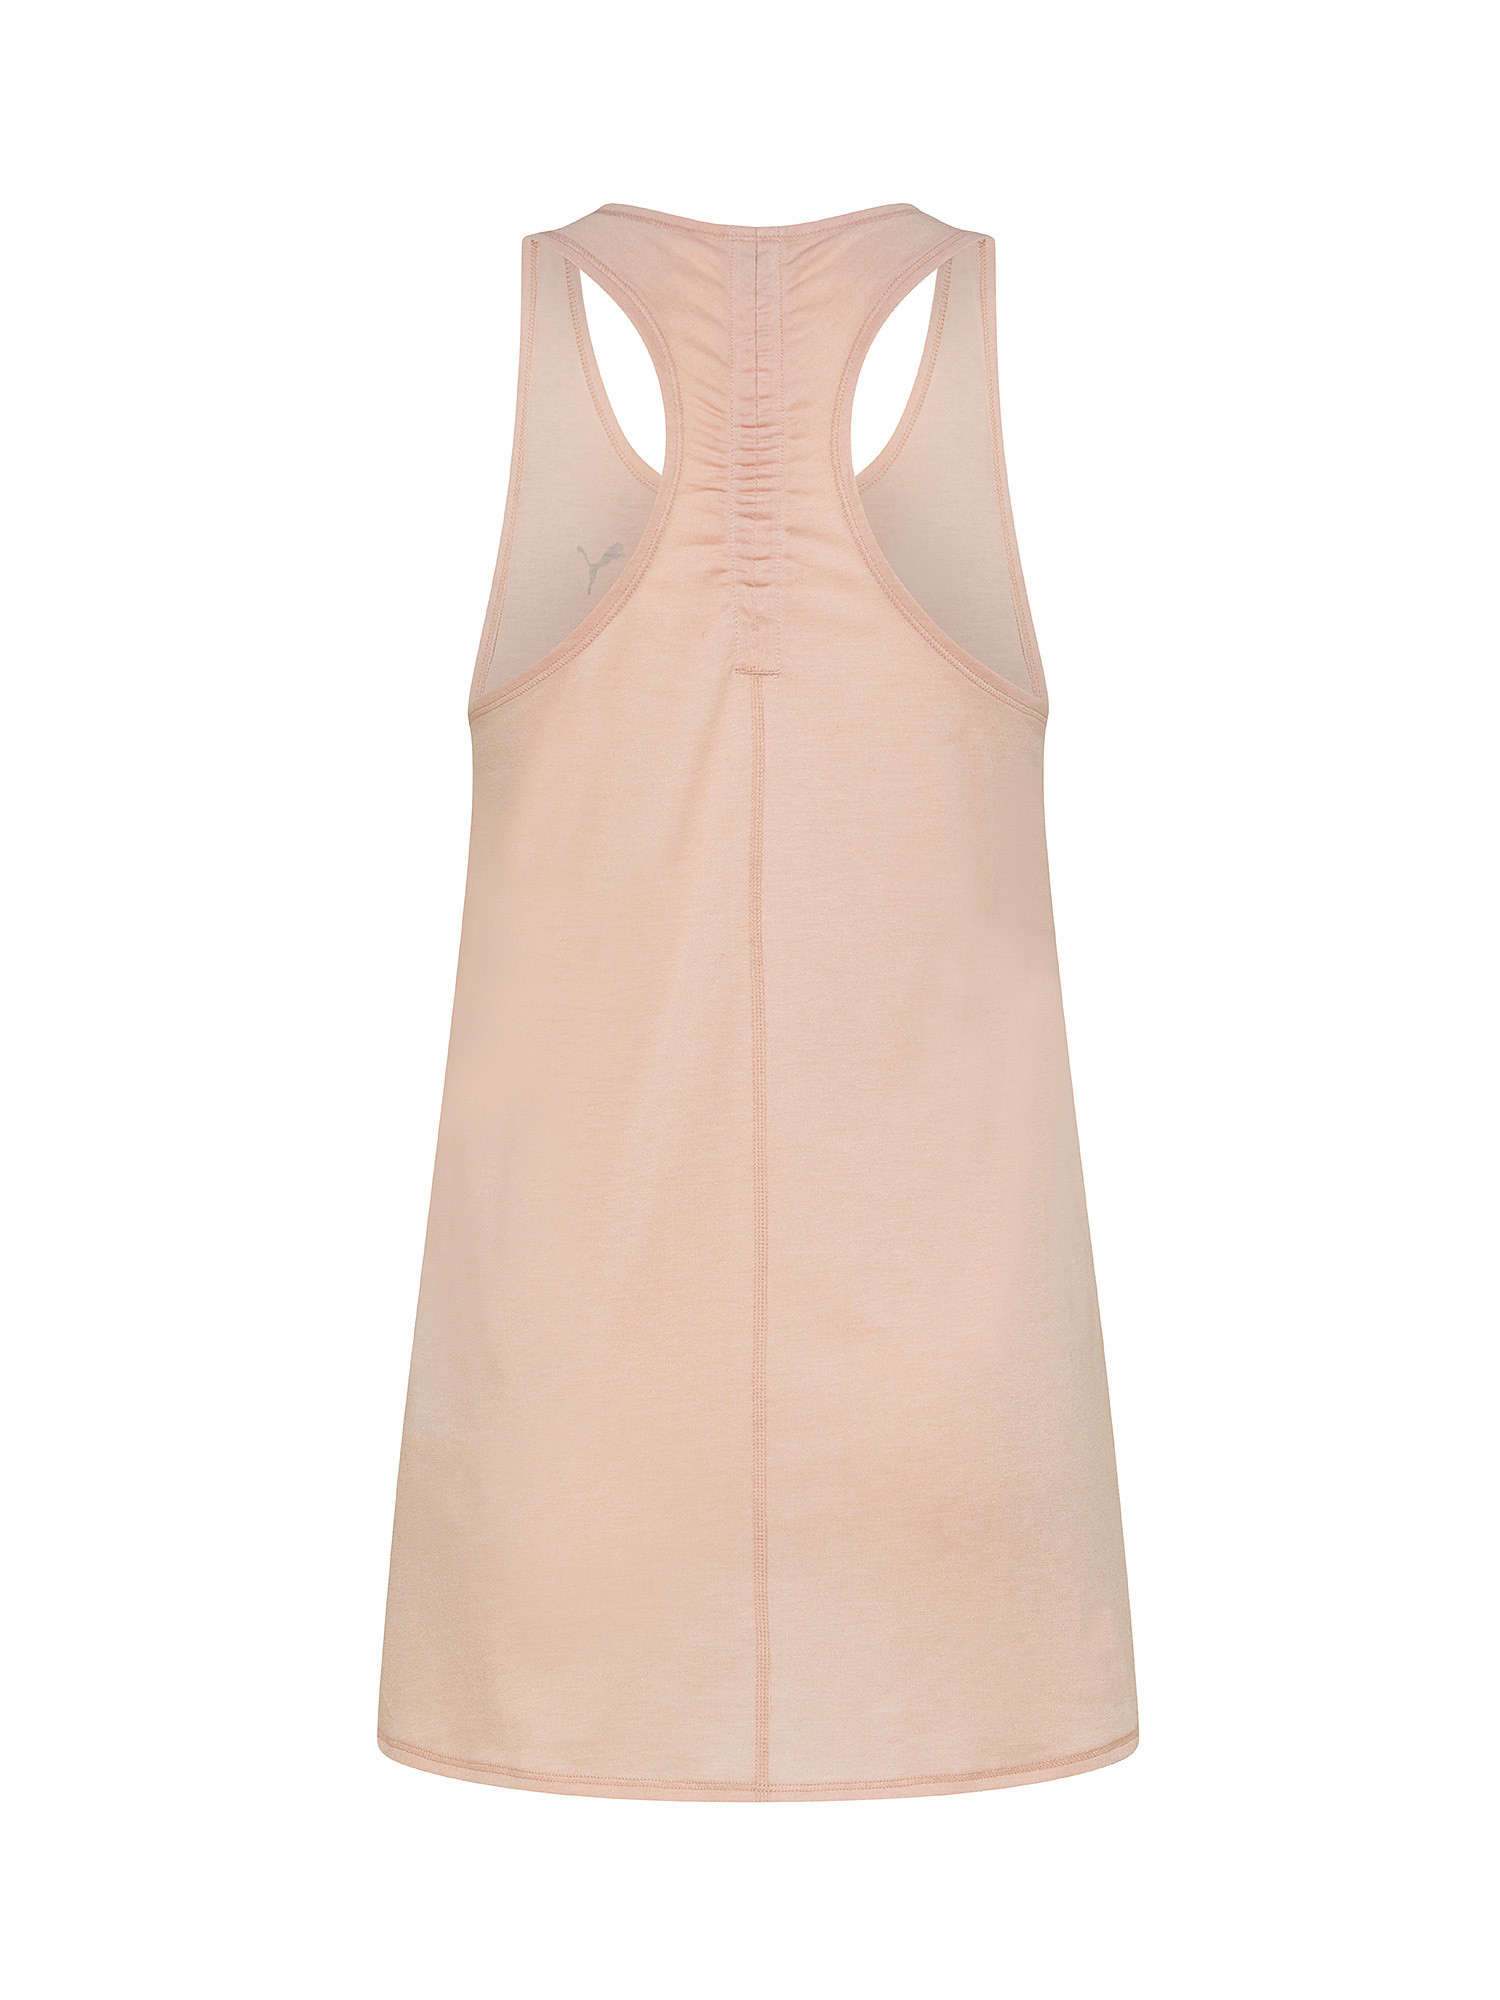 Tank top with American neckline, Light Pink, large image number 1